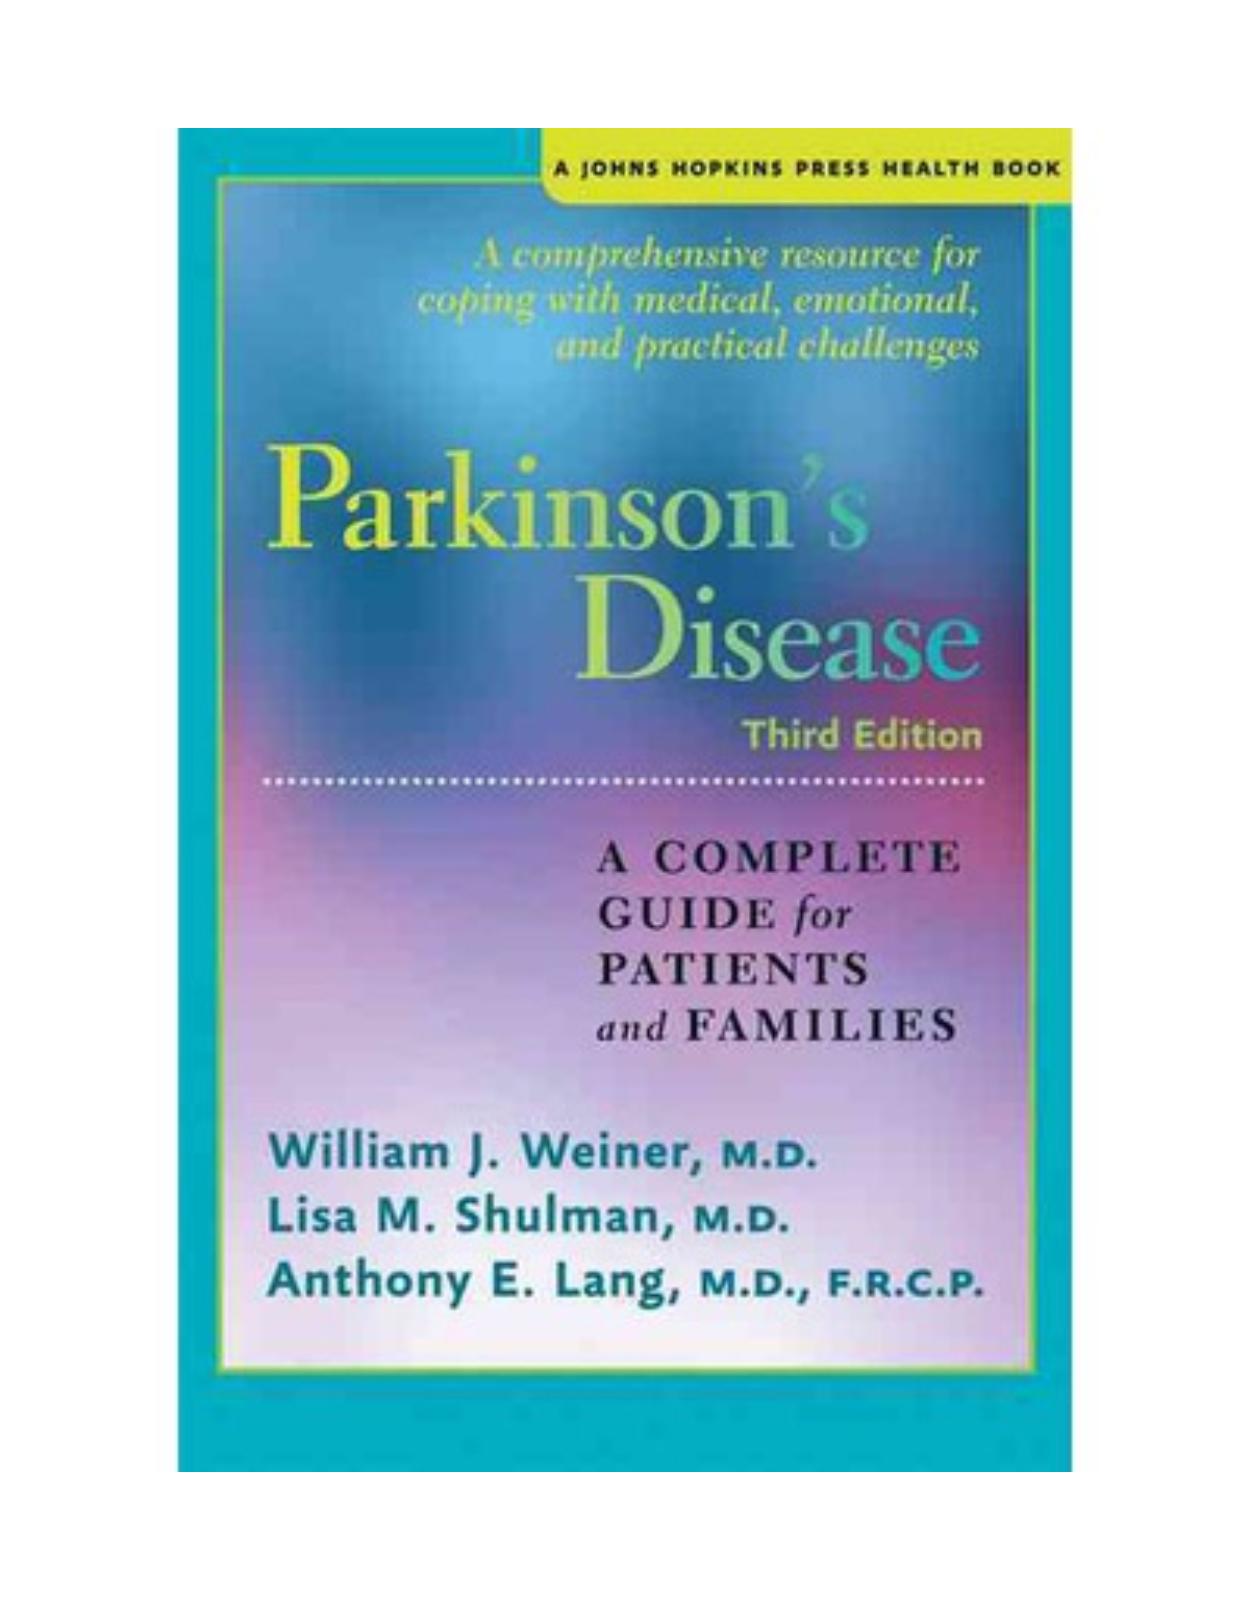 Parkinson's Disease. A Complete Guide for Patients and Families (Third Edition)